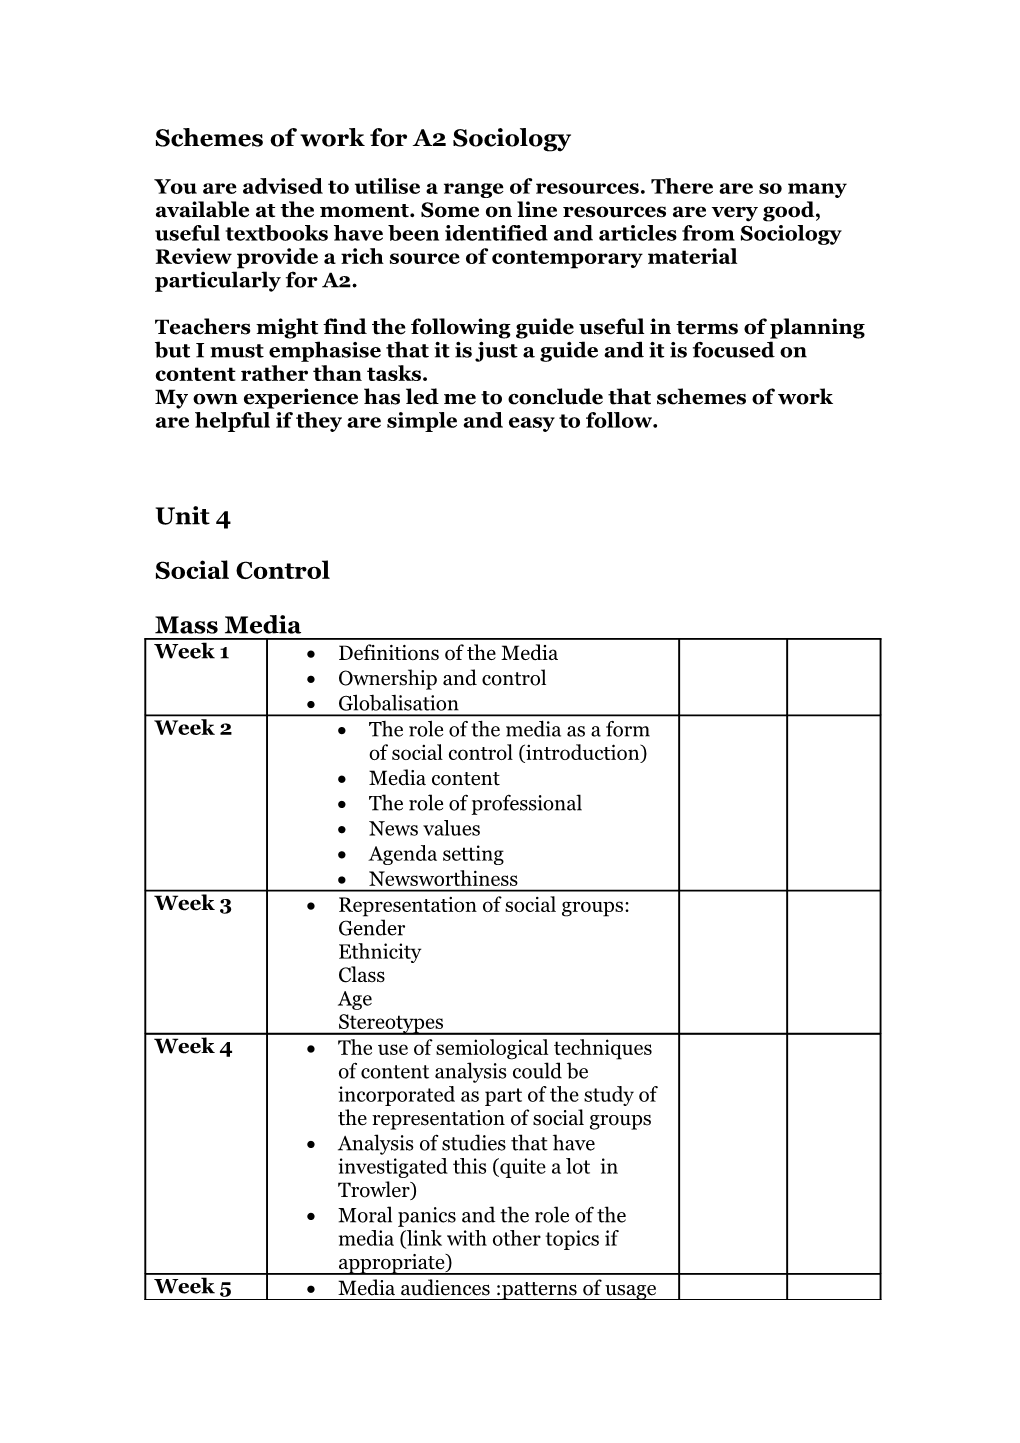 Schemes of Work for A2 Sociology